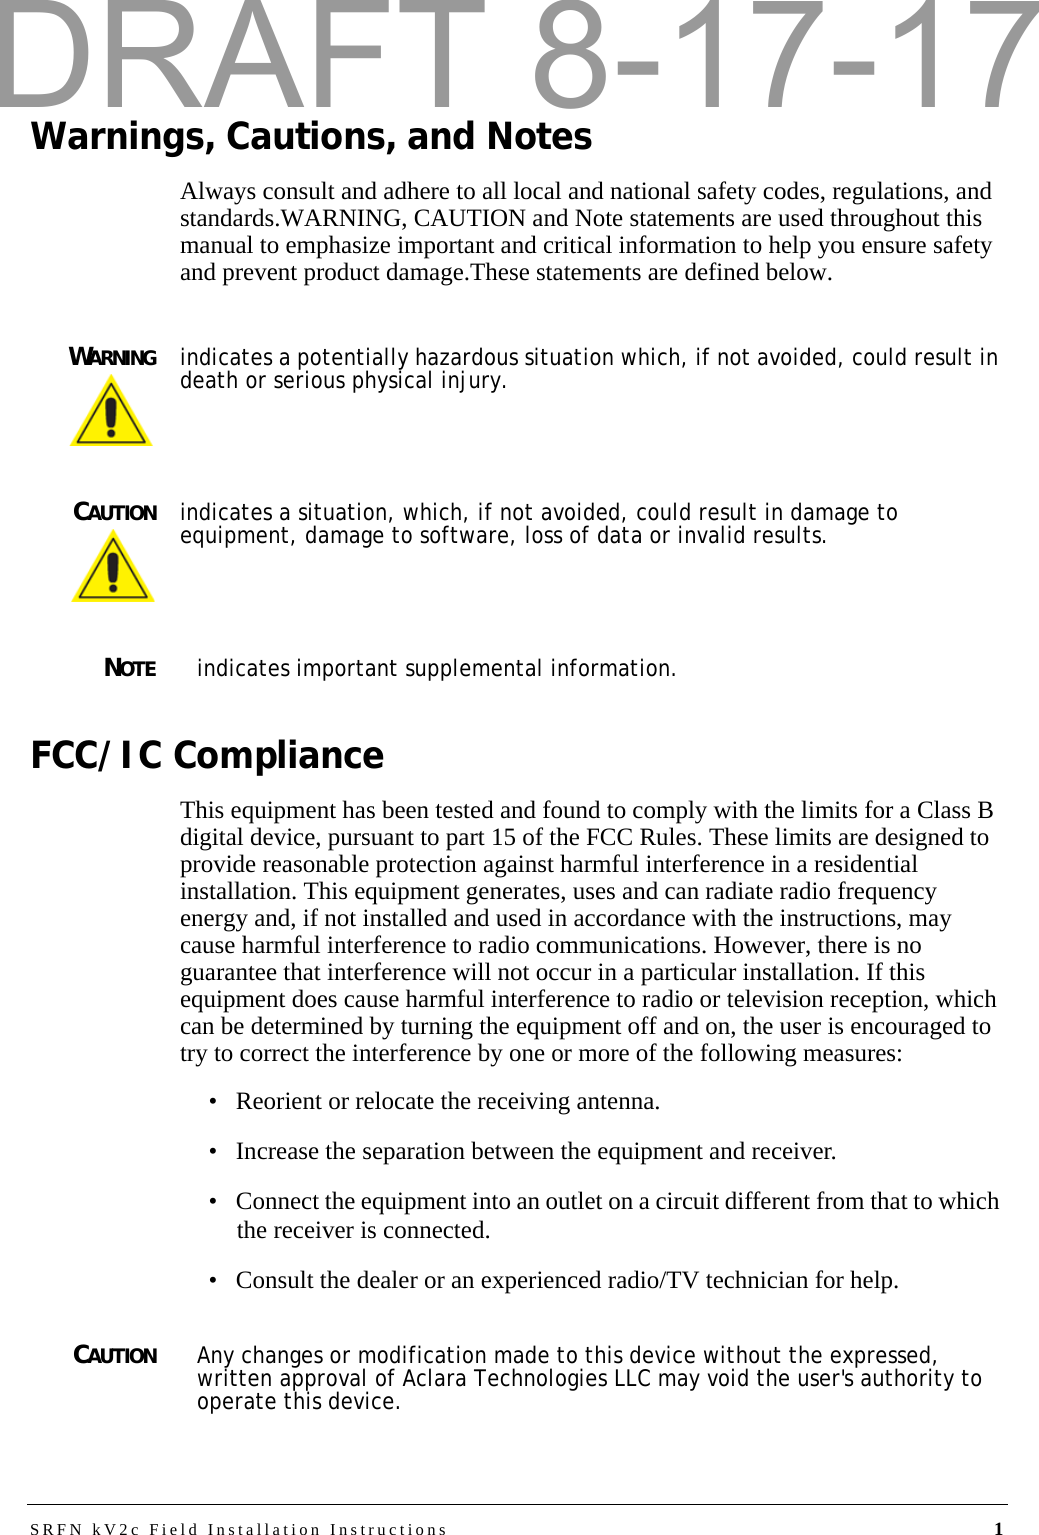 SRFN kV2c Field Installation Instructions 1Warnings, Cautions, and NotesAlways consult and adhere to all local and national safety codes, regulations, and standards.WARNING, CAUTION and Note statements are used throughout this manual to emphasize important and critical information to help you ensure safety and prevent product damage.These statements are defined below.WARNINGindicates a potentially hazardous situation which, if not avoided, could result in death or serious physical injury.CAUTIONindicates a situation, which, if not avoided, could result in damage to equipment, damage to software, loss of data or invalid results.NOTEindicates important supplemental information.FCC/IC ComplianceThis equipment has been tested and found to comply with the limits for a Class B digital device, pursuant to part 15 of the FCC Rules. These limits are designed to provide reasonable protection against harmful interference in a residential installation. This equipment generates, uses and can radiate radio frequency energy and, if not installed and used in accordance with the instructions, may cause harmful interference to radio communications. However, there is no guarantee that interference will not occur in a particular installation. If this equipment does cause harmful interference to radio or television reception, which can be determined by turning the equipment off and on, the user is encouraged to try to correct the interference by one or more of the following measures:• Reorient or relocate the receiving antenna.• Increase the separation between the equipment and receiver.• Connect the equipment into an outlet on a circuit different from that to which the receiver is connected.• Consult the dealer or an experienced radio/TV technician for help.CAUTIONAny changes or modification made to this device without the expressed, written approval of Aclara Technologies LLC may void the user&apos;s authority to operate this device.DRAFT 8-17-17